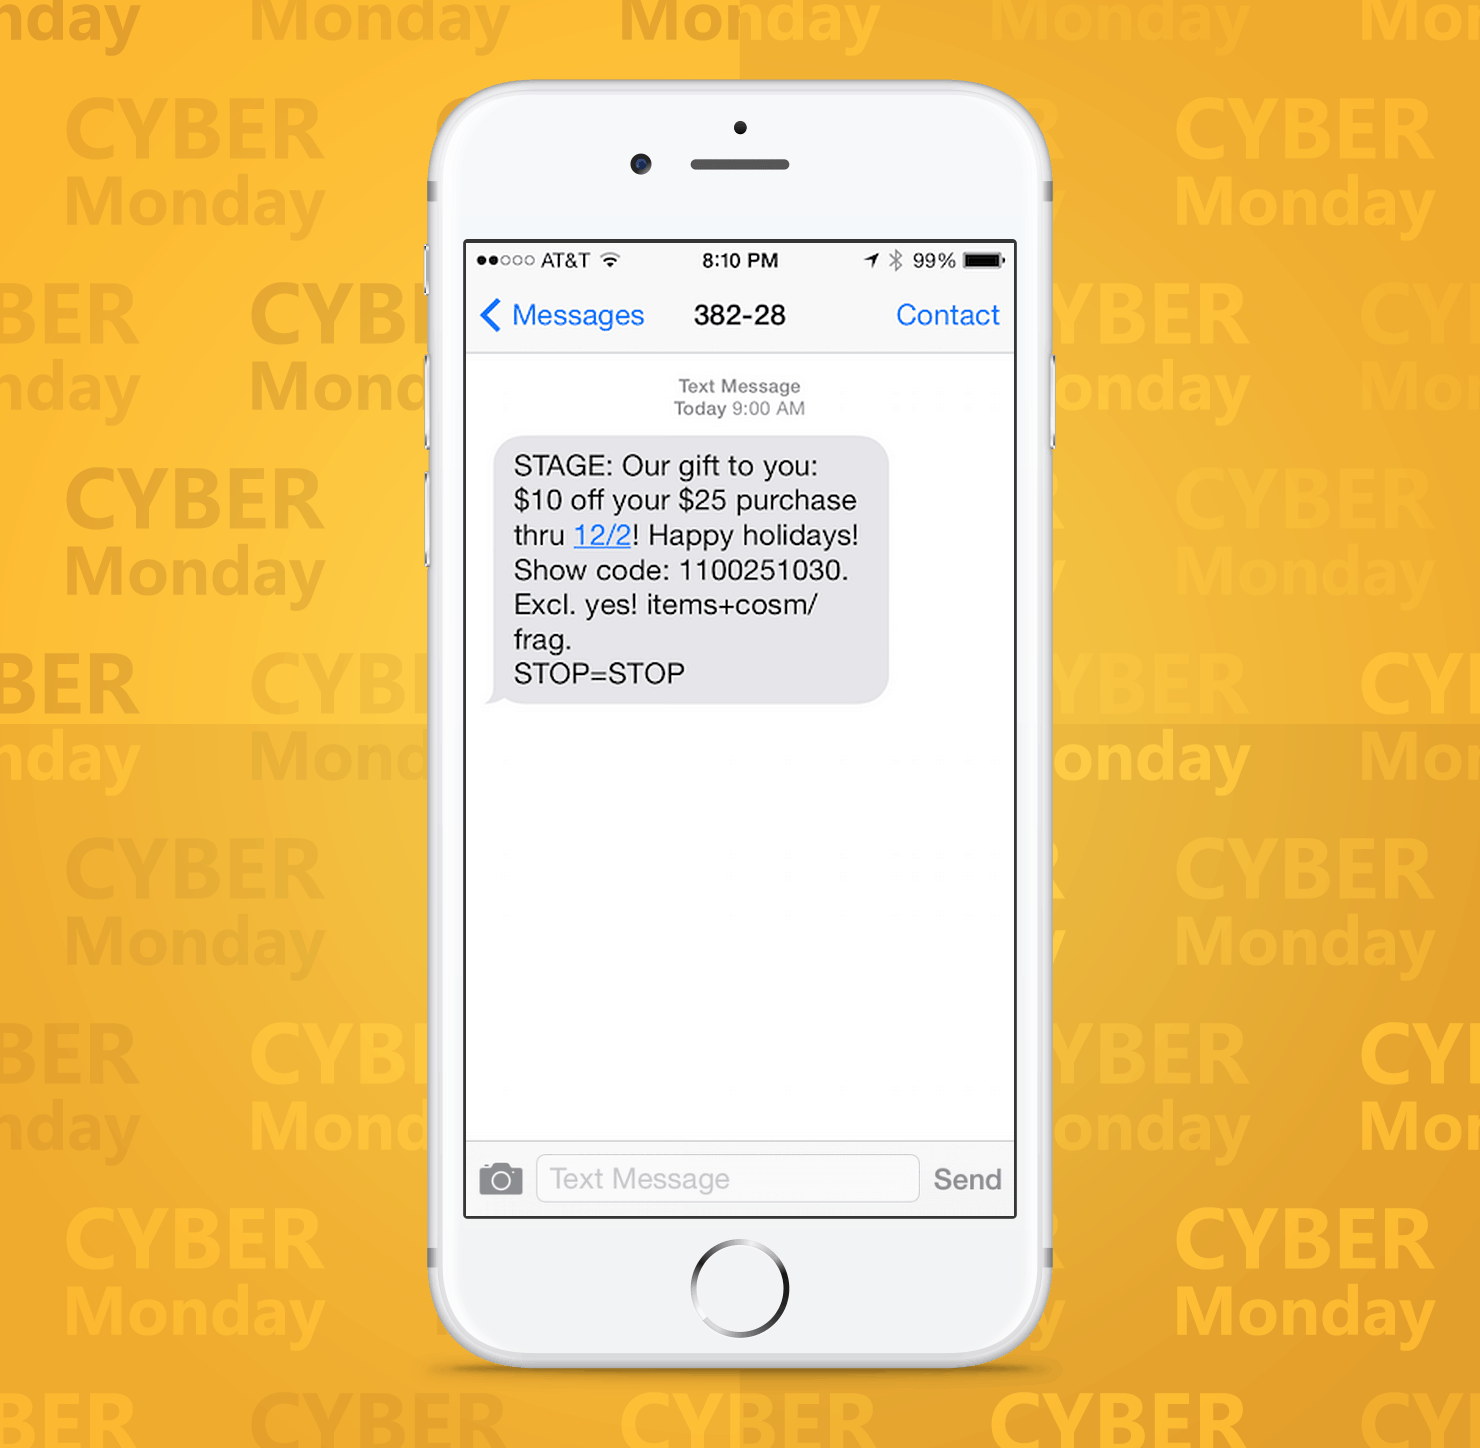 SMS Coupon Example Sent on Cyber Monday From Stage Retail Stores to Customers